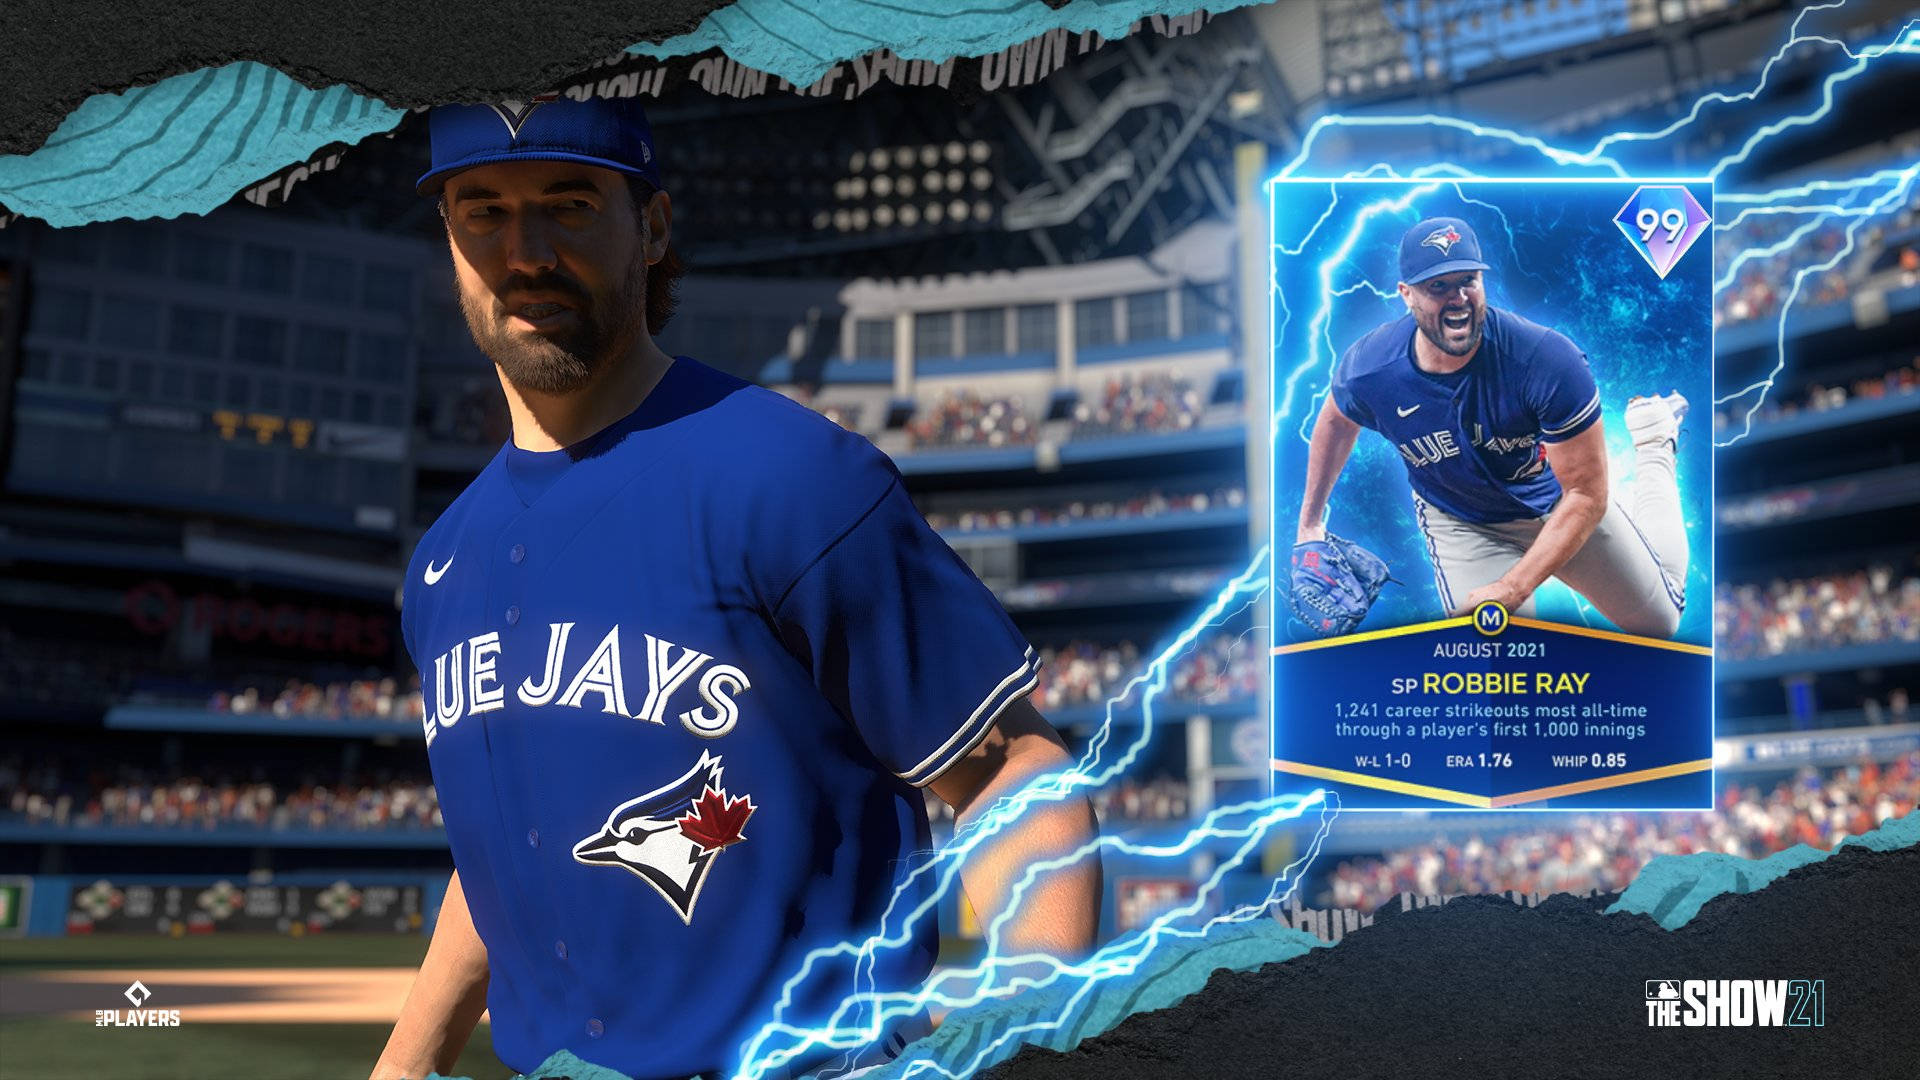 Robbie Ray With Mini-Card-Like Graphic Wallpaper